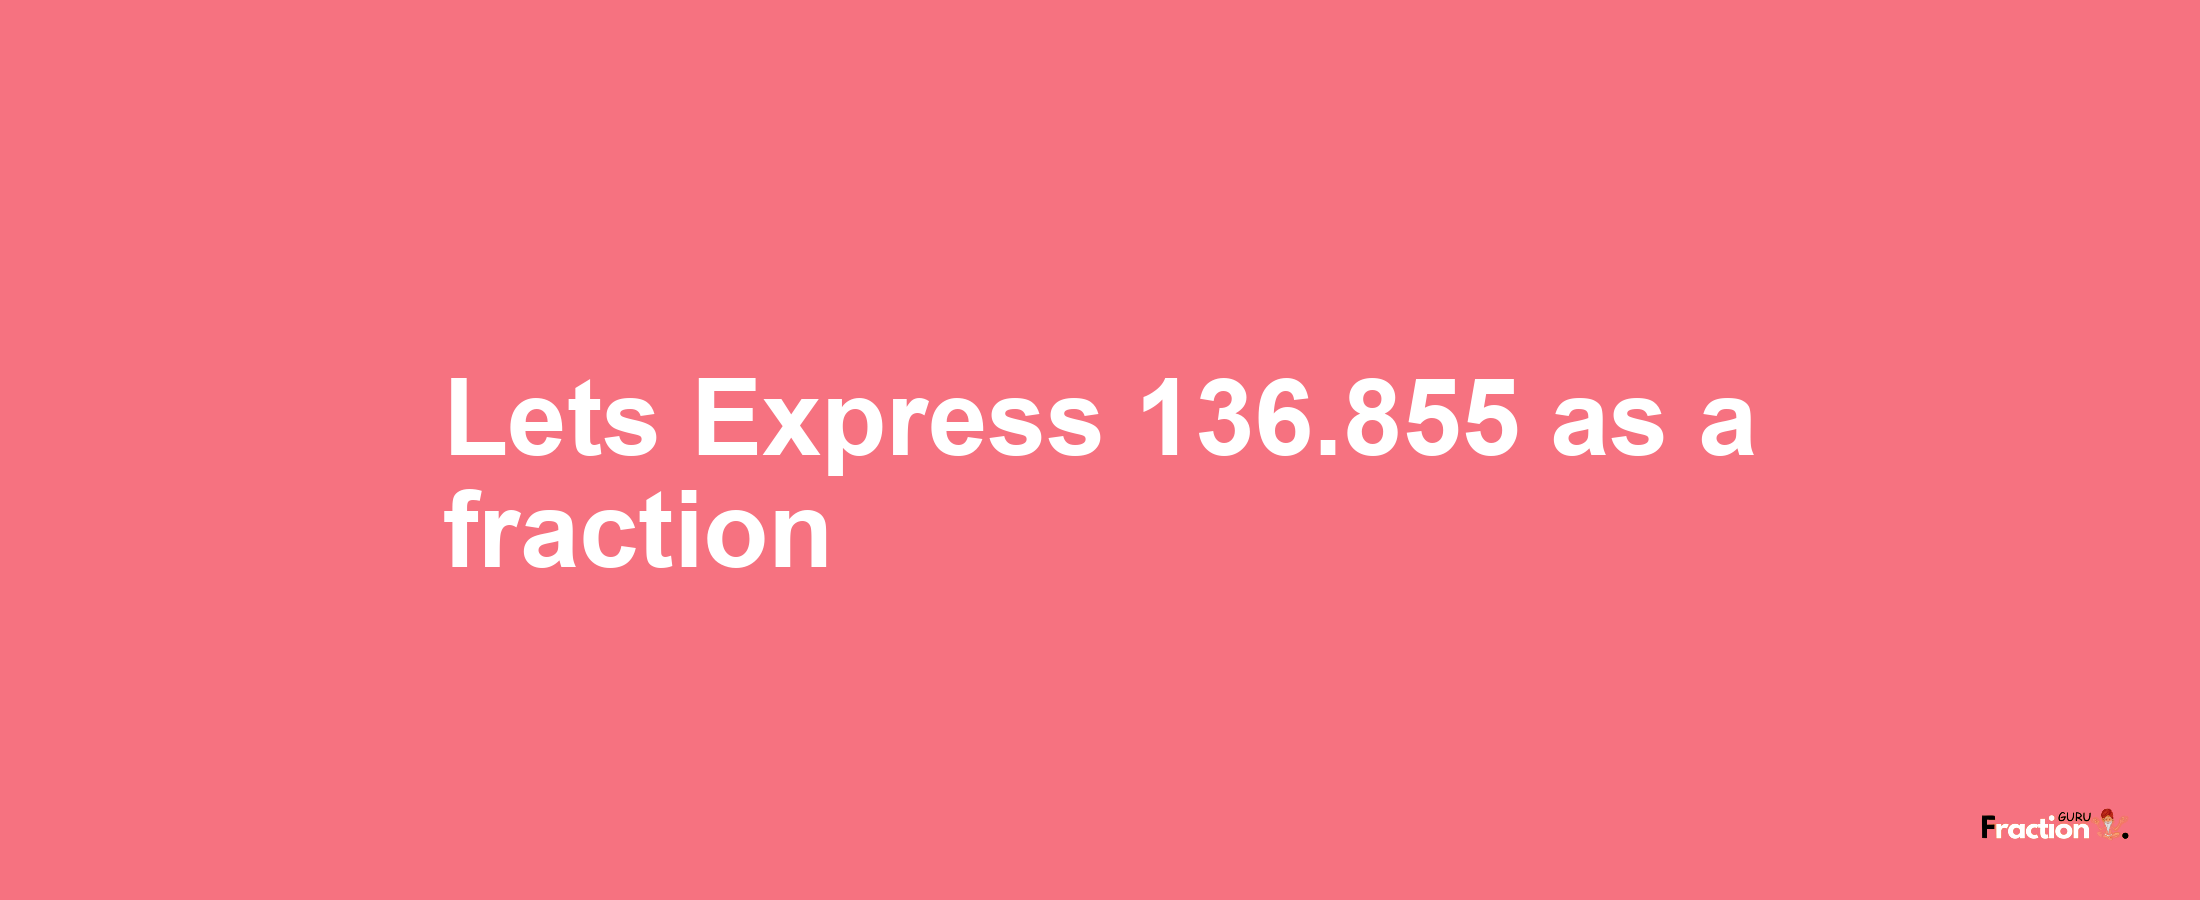 Lets Express 136.855 as afraction